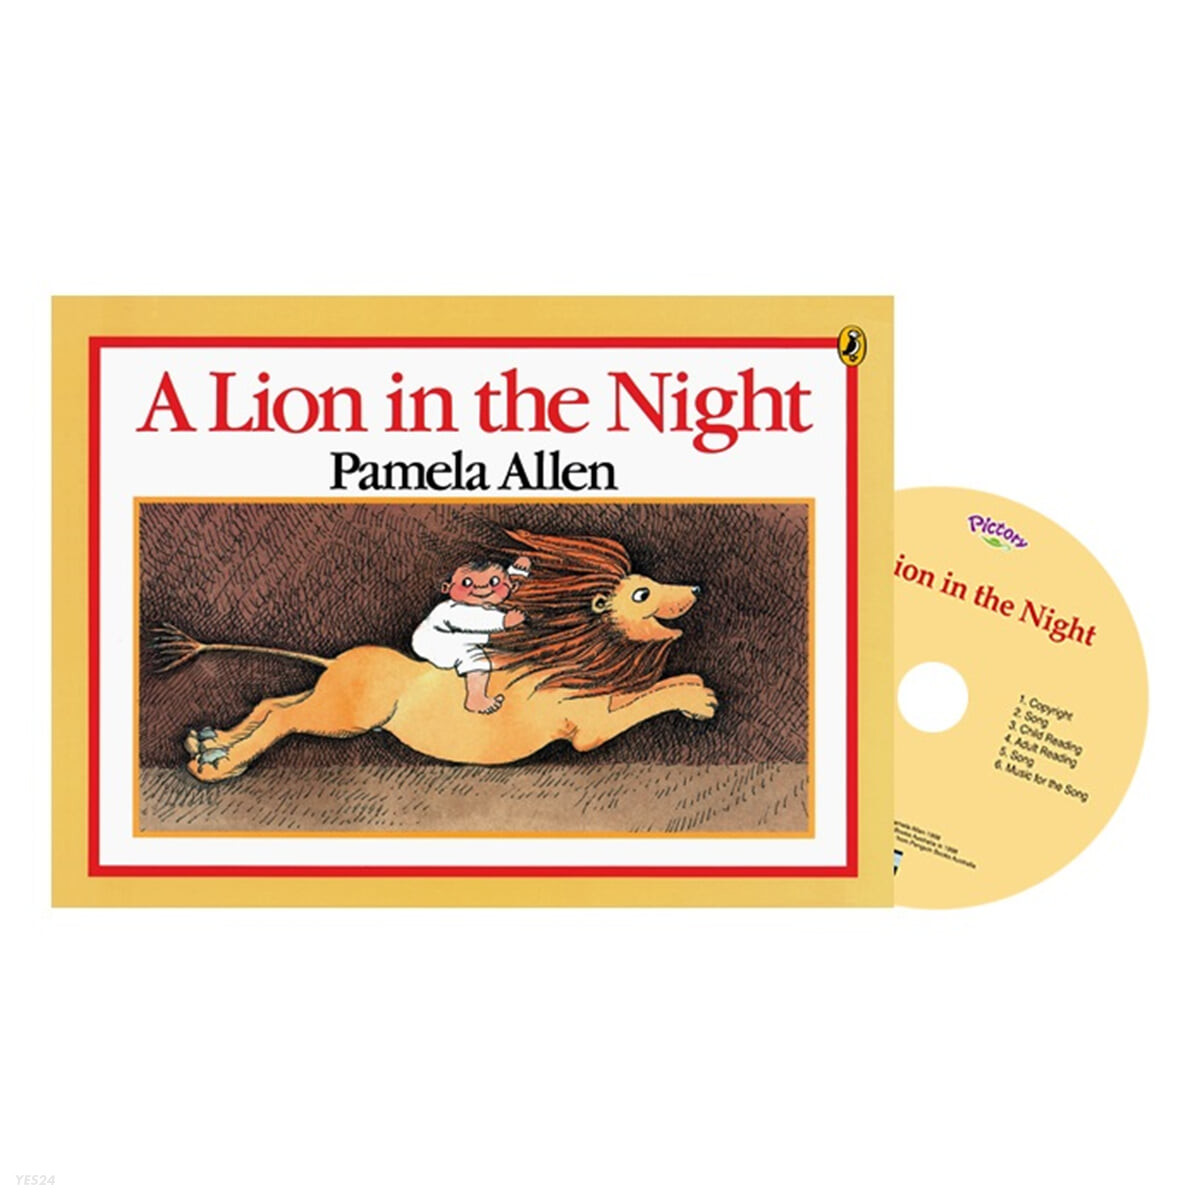 (A) lion in the night